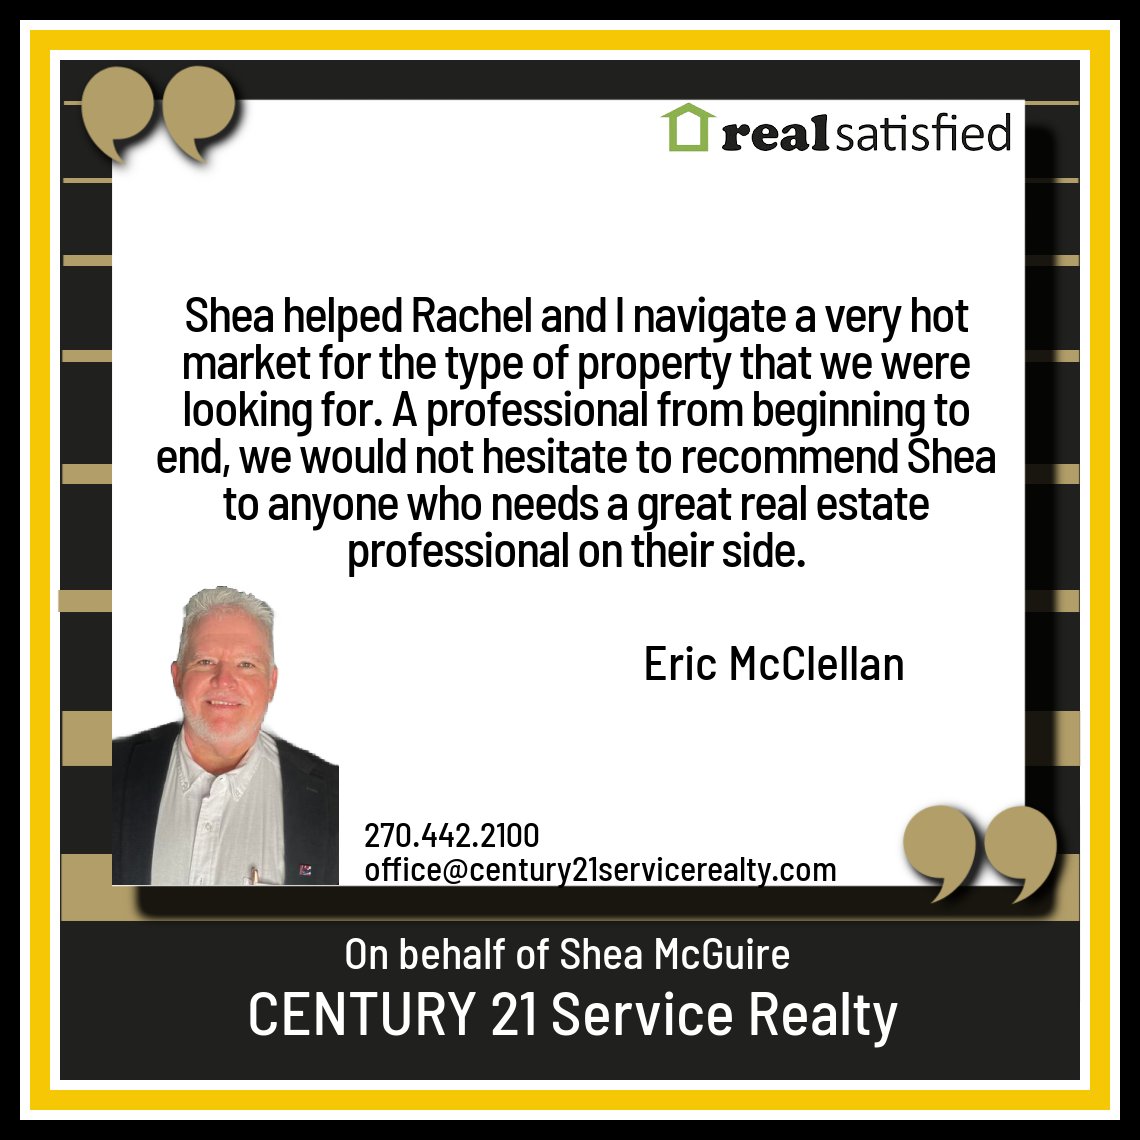 Another Great Experience with Shea!

#RealSatisfied #realtor #realestate #paducahrealestate #westkentuckyrealestate #lakesrealestate #4riversrealestate #bentonrealestate #murrayrealestate #mayfieldrealestate  #century21 #Century21servicerealty #communityfirst #C21 #C21Service